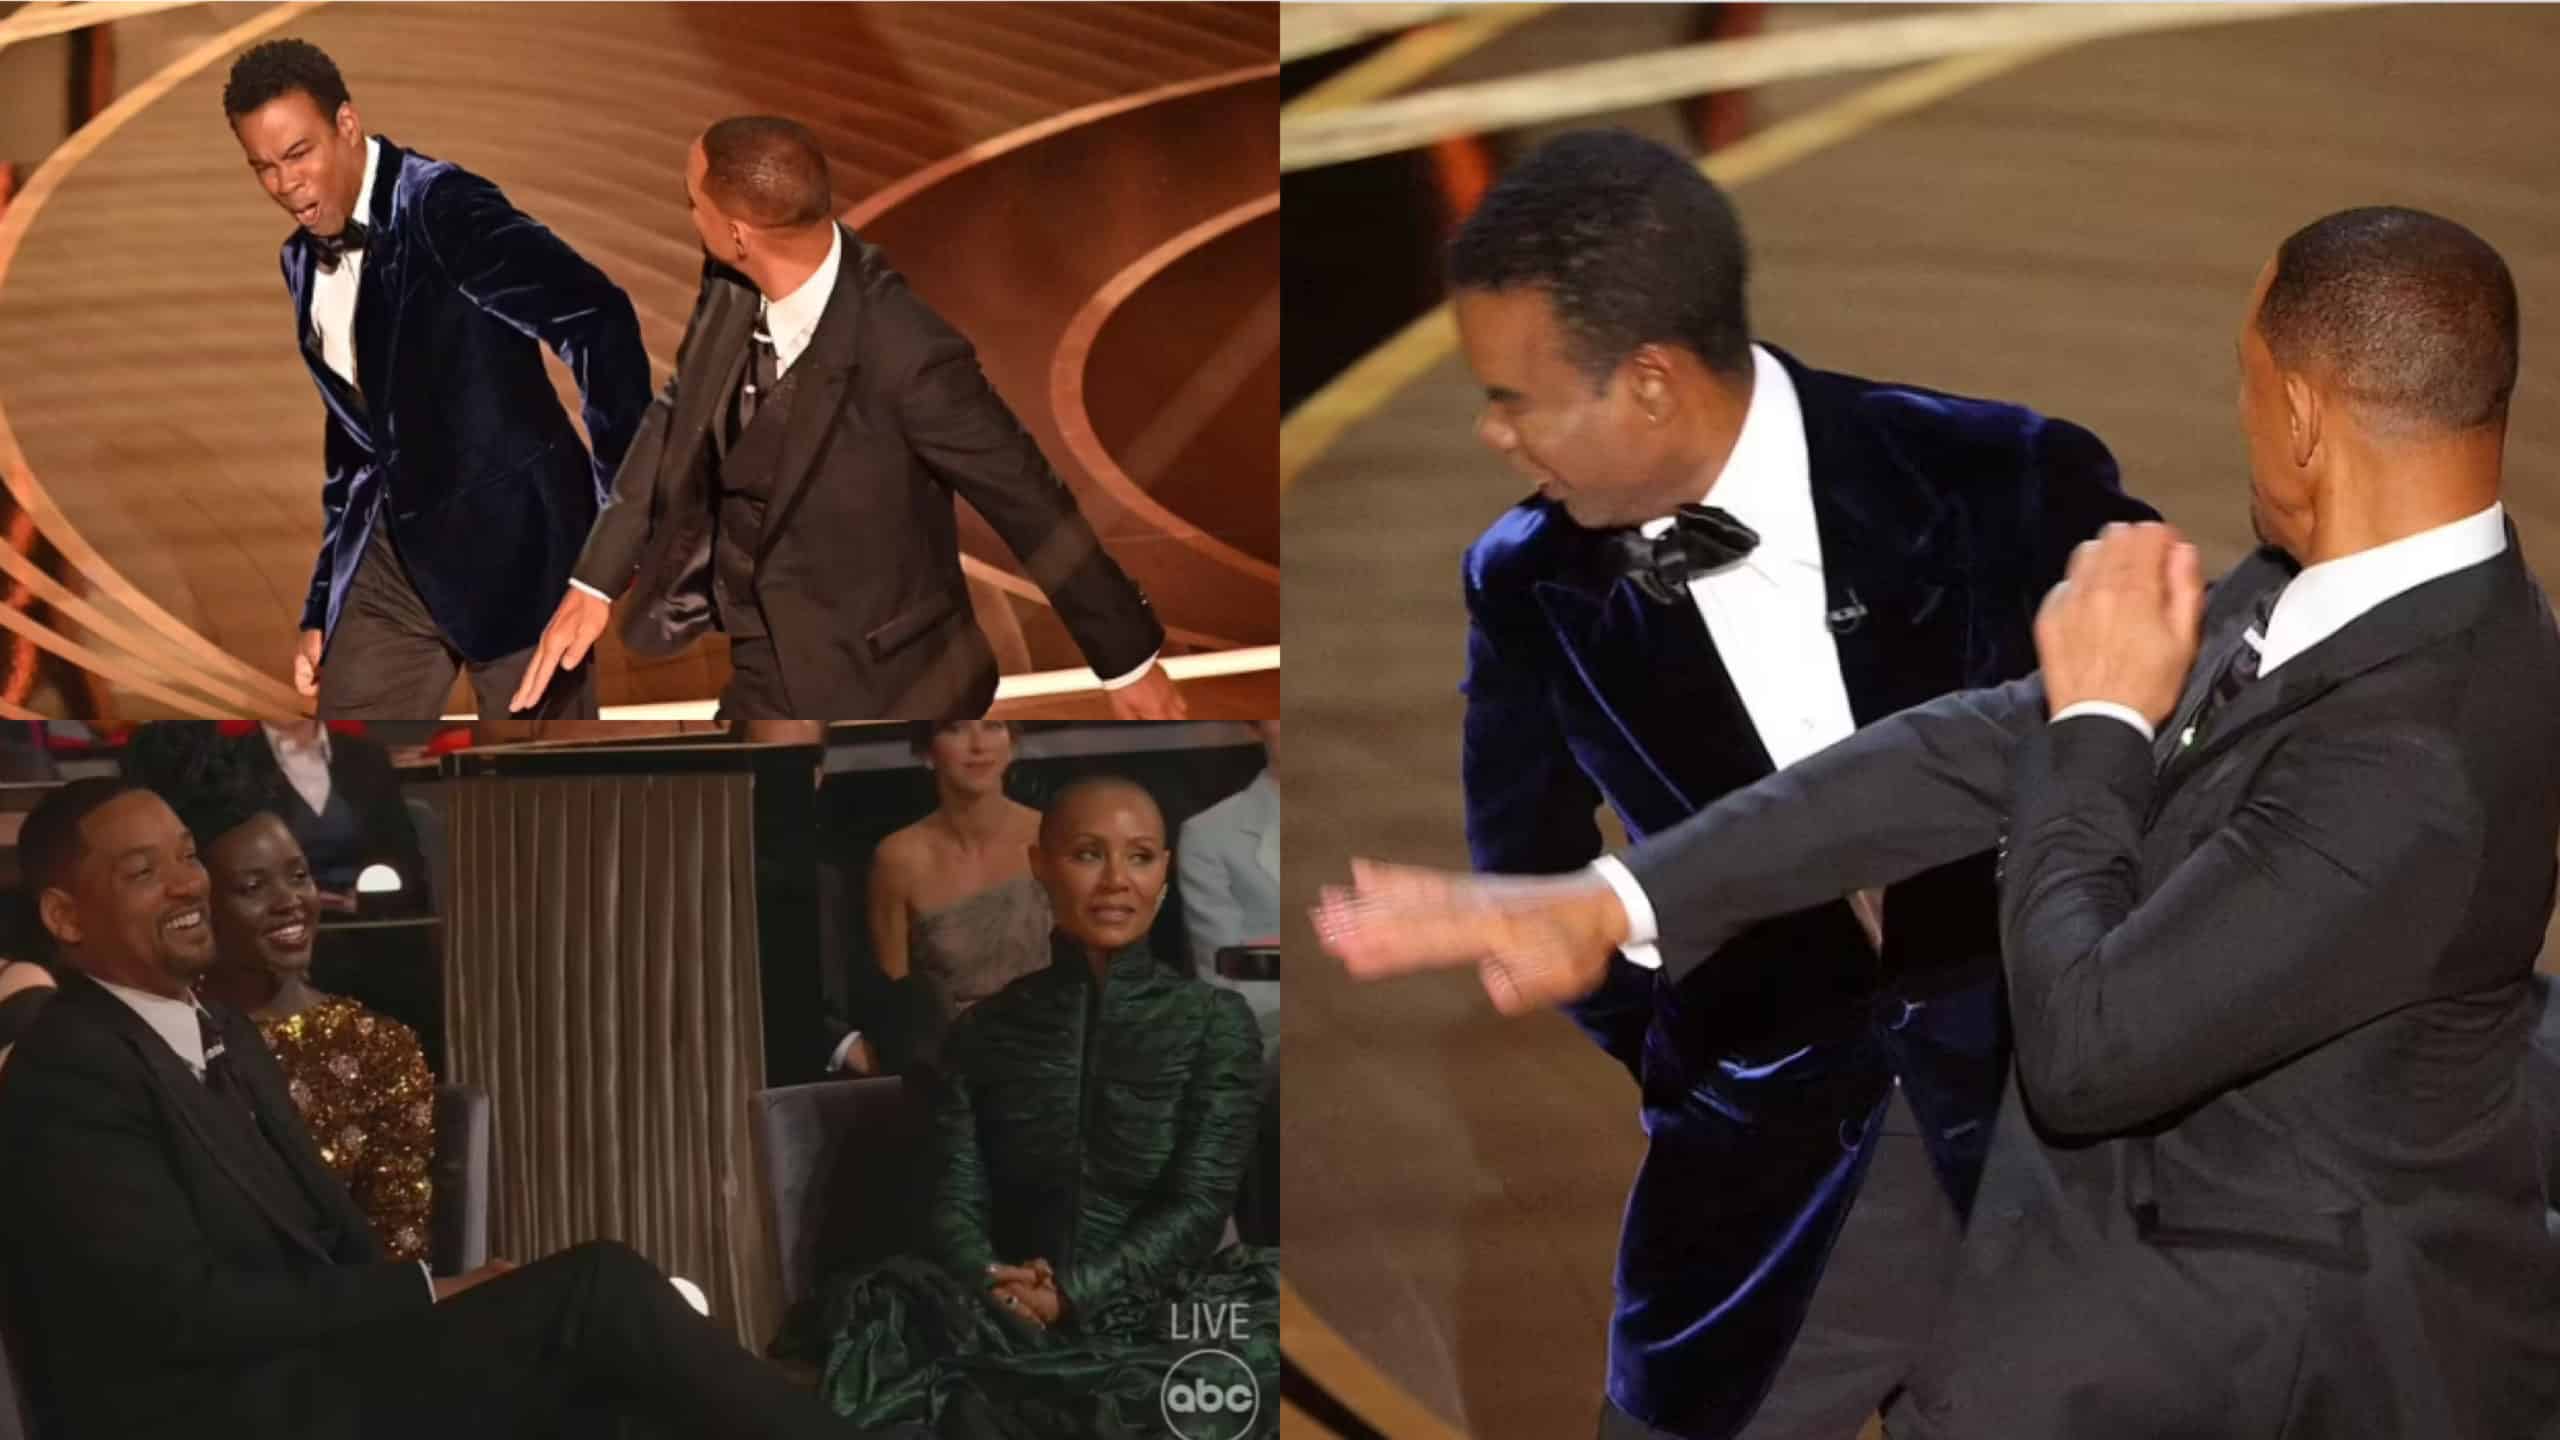 Will Smith slaps Chris Rock at the Oscars for making jokes about his wife's head